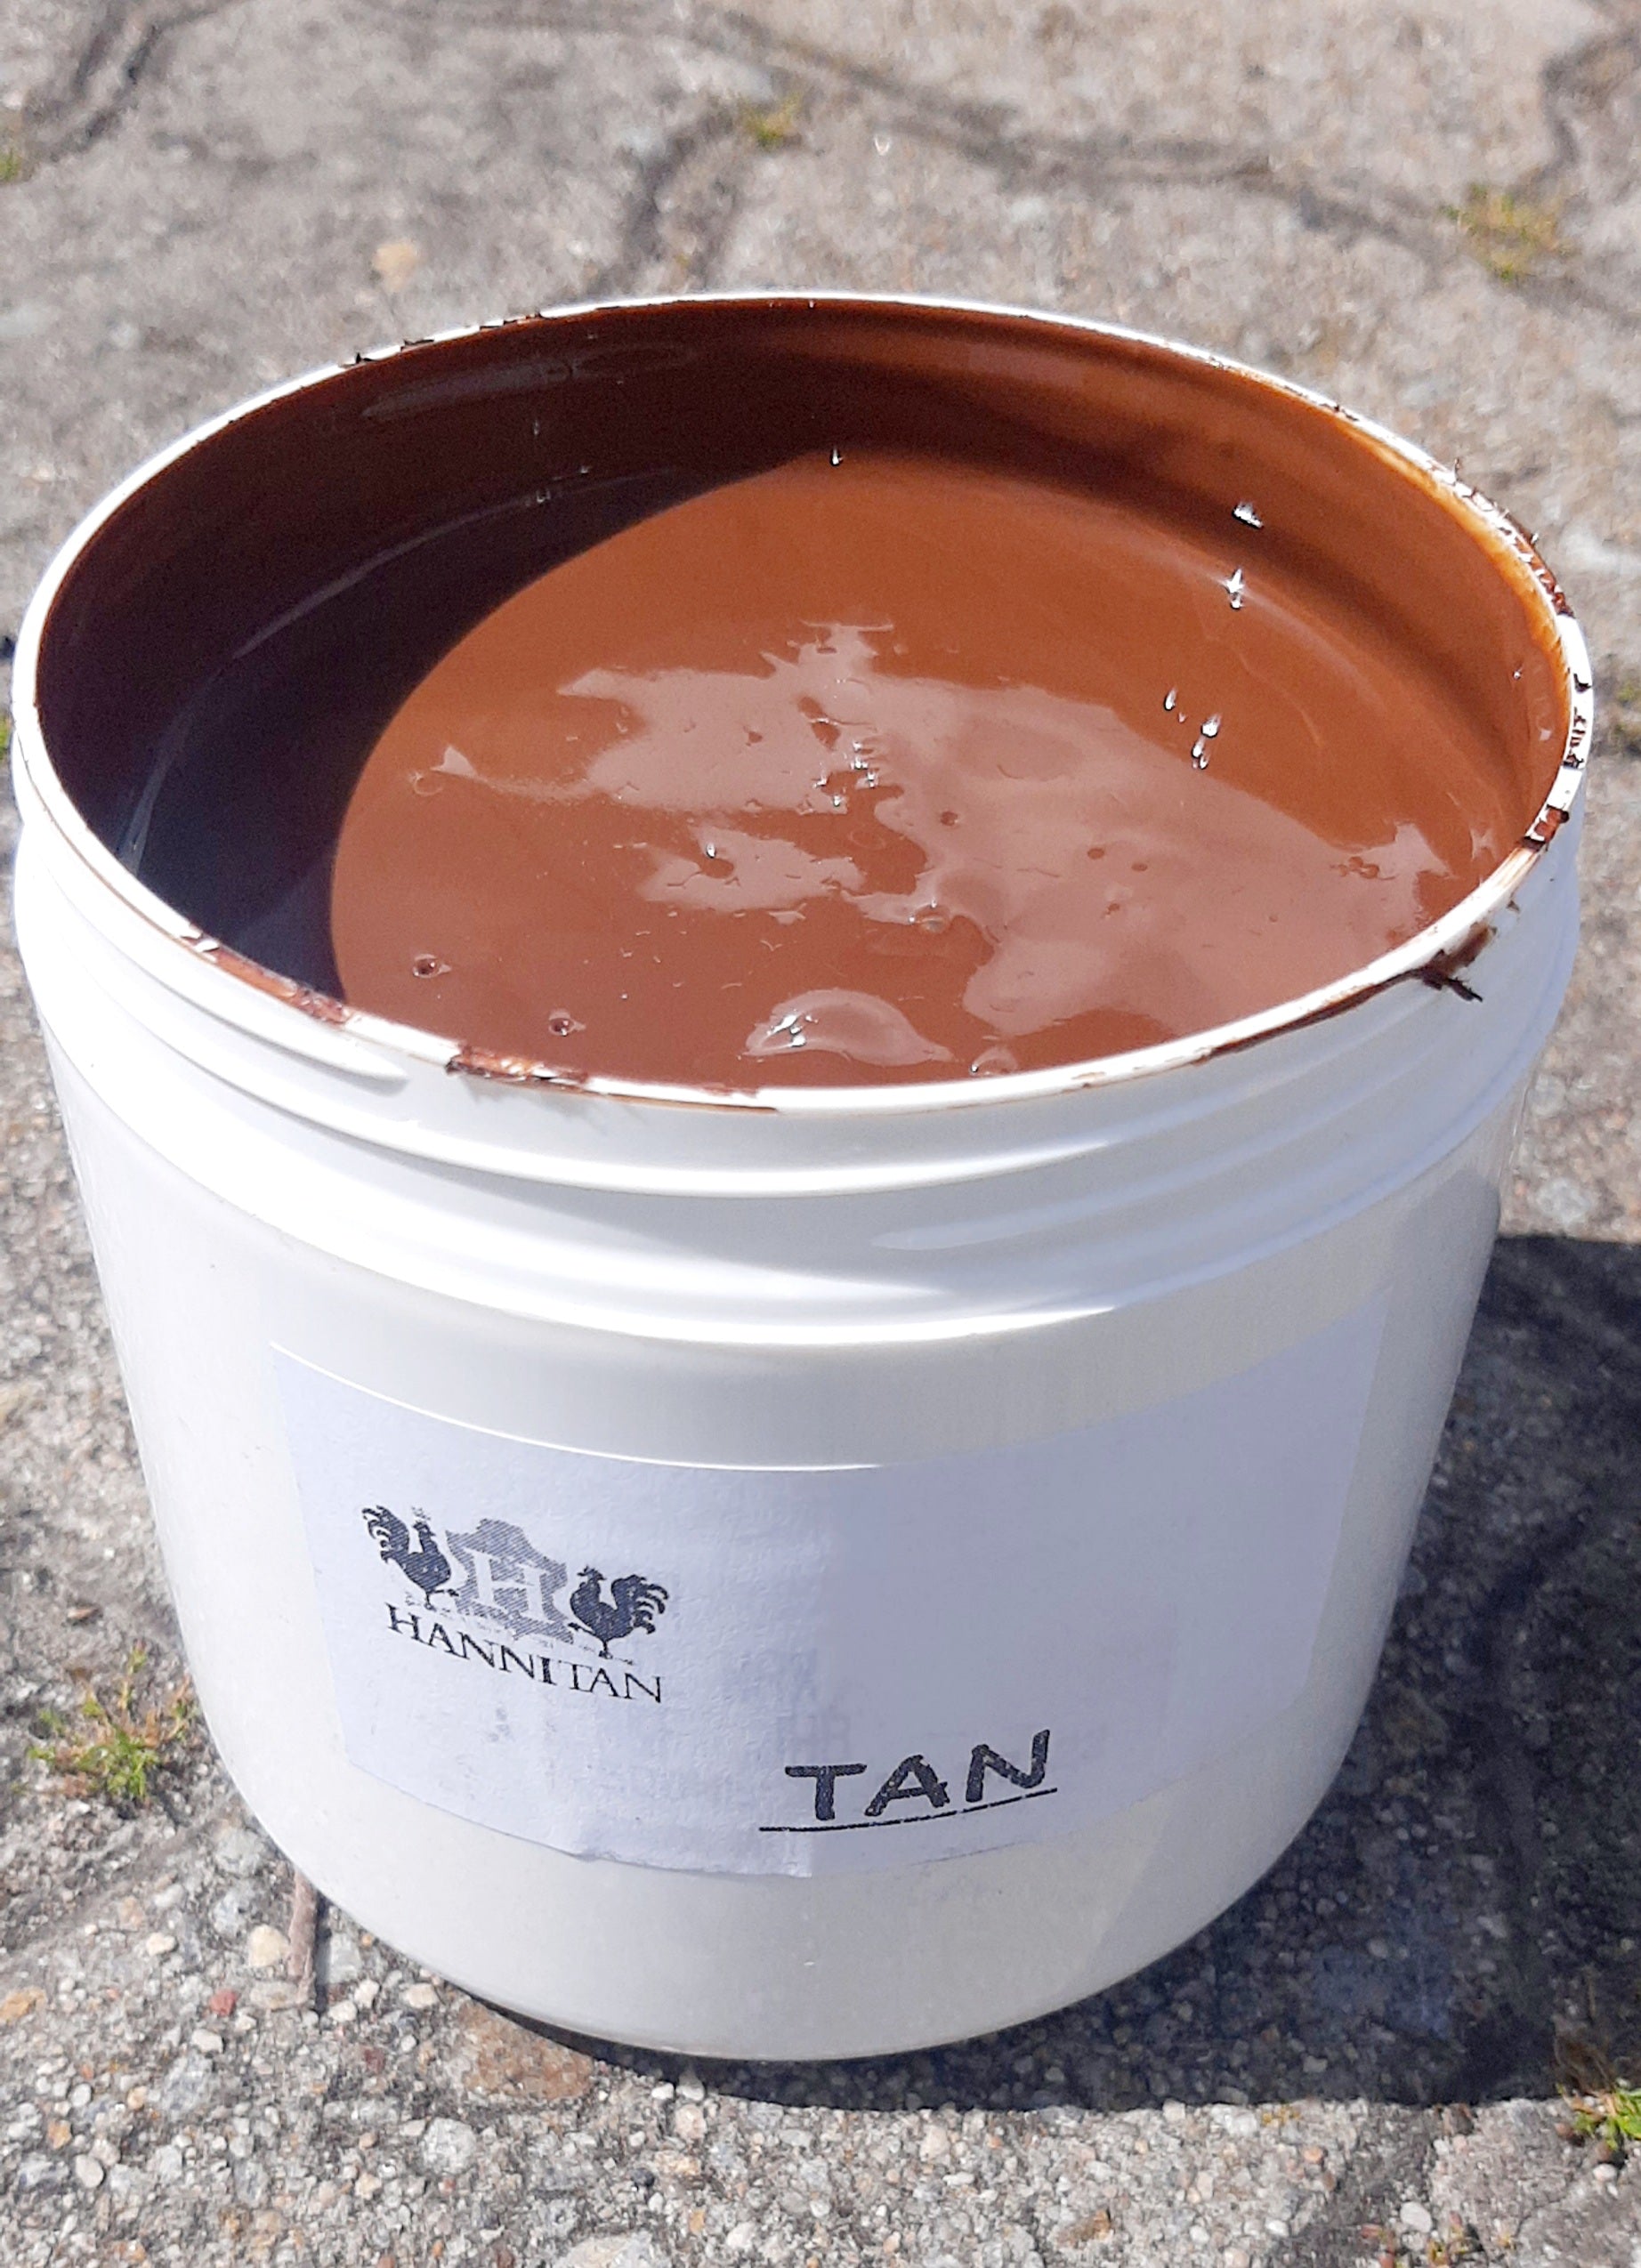 Cape Masai leather Leather Oil wax 500ml  tan colour while container is open 